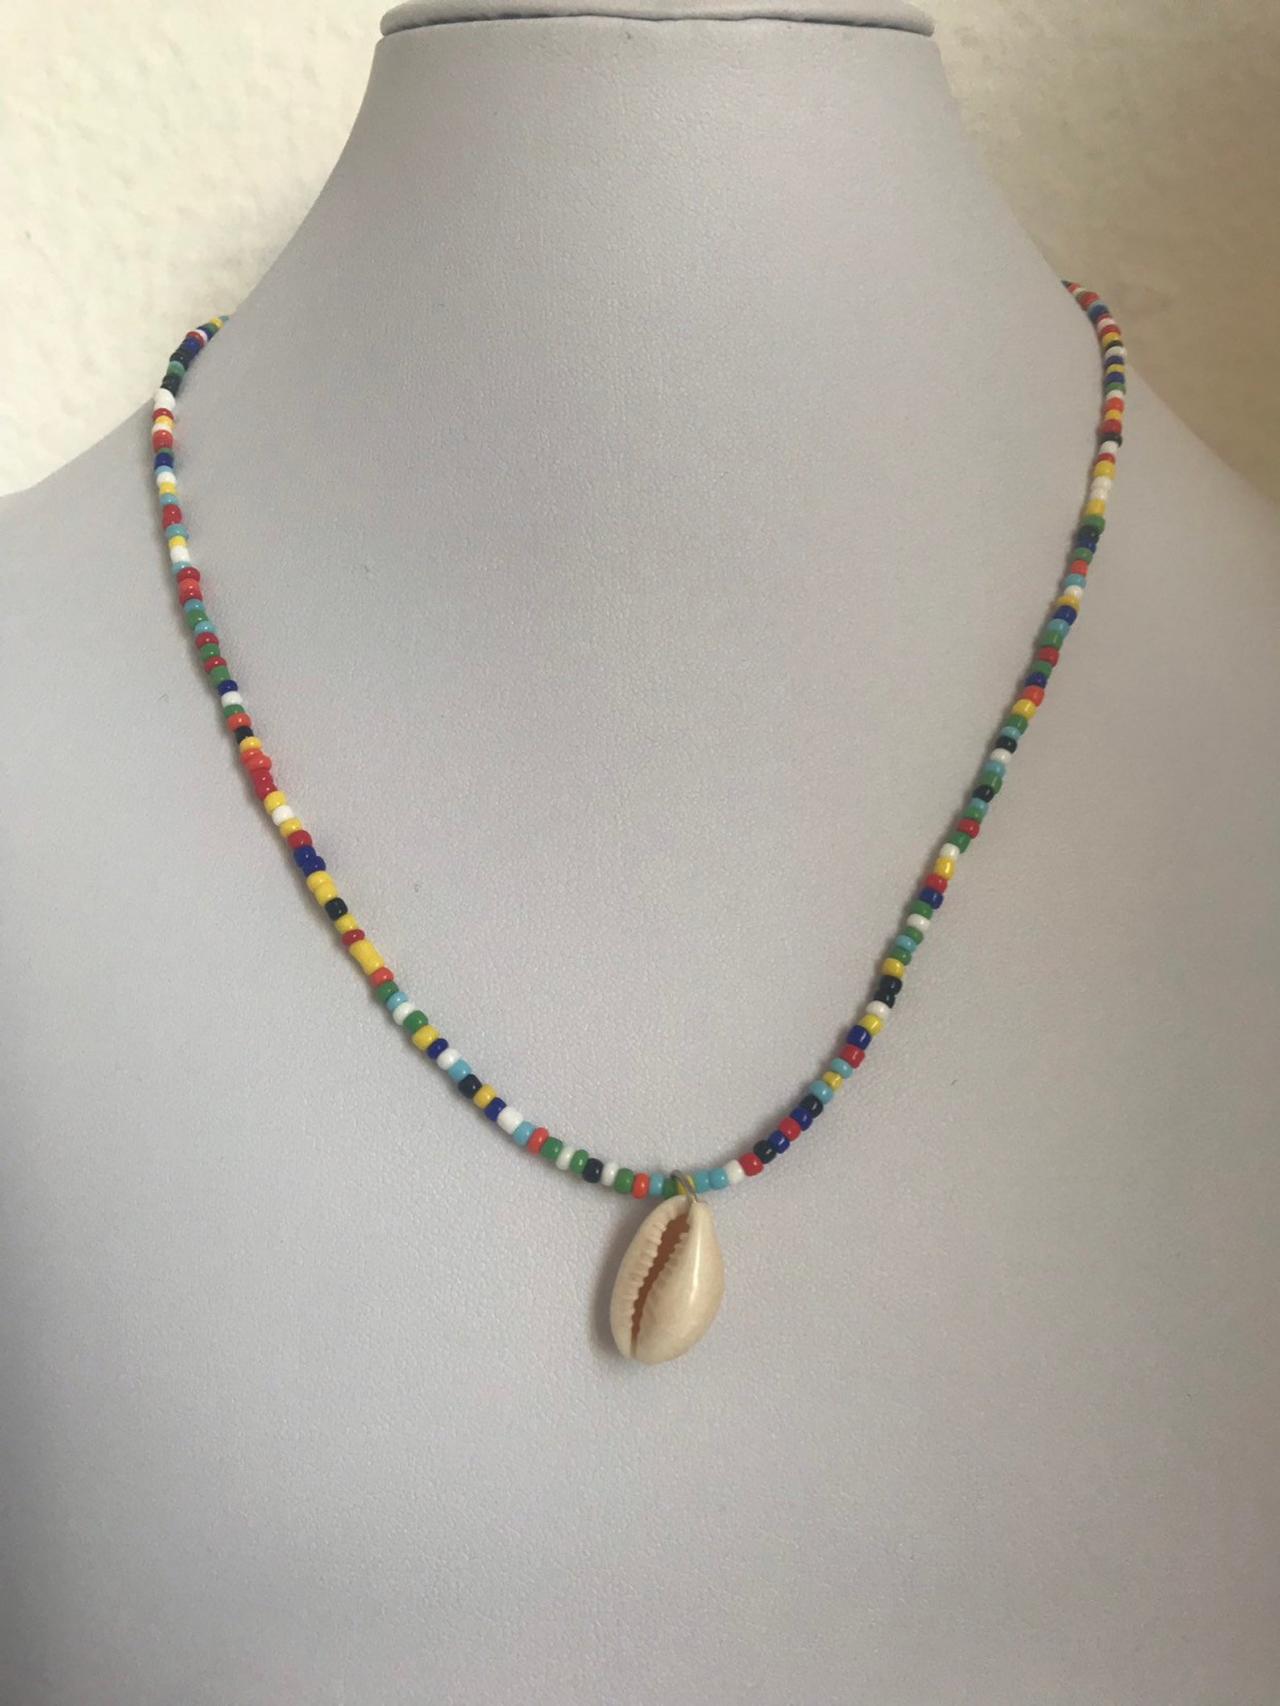 Shell Necklace 359- Colorfully Beaded Shell Necklace Friendship Summer Jewelry Colorful Happiness Boho Chic